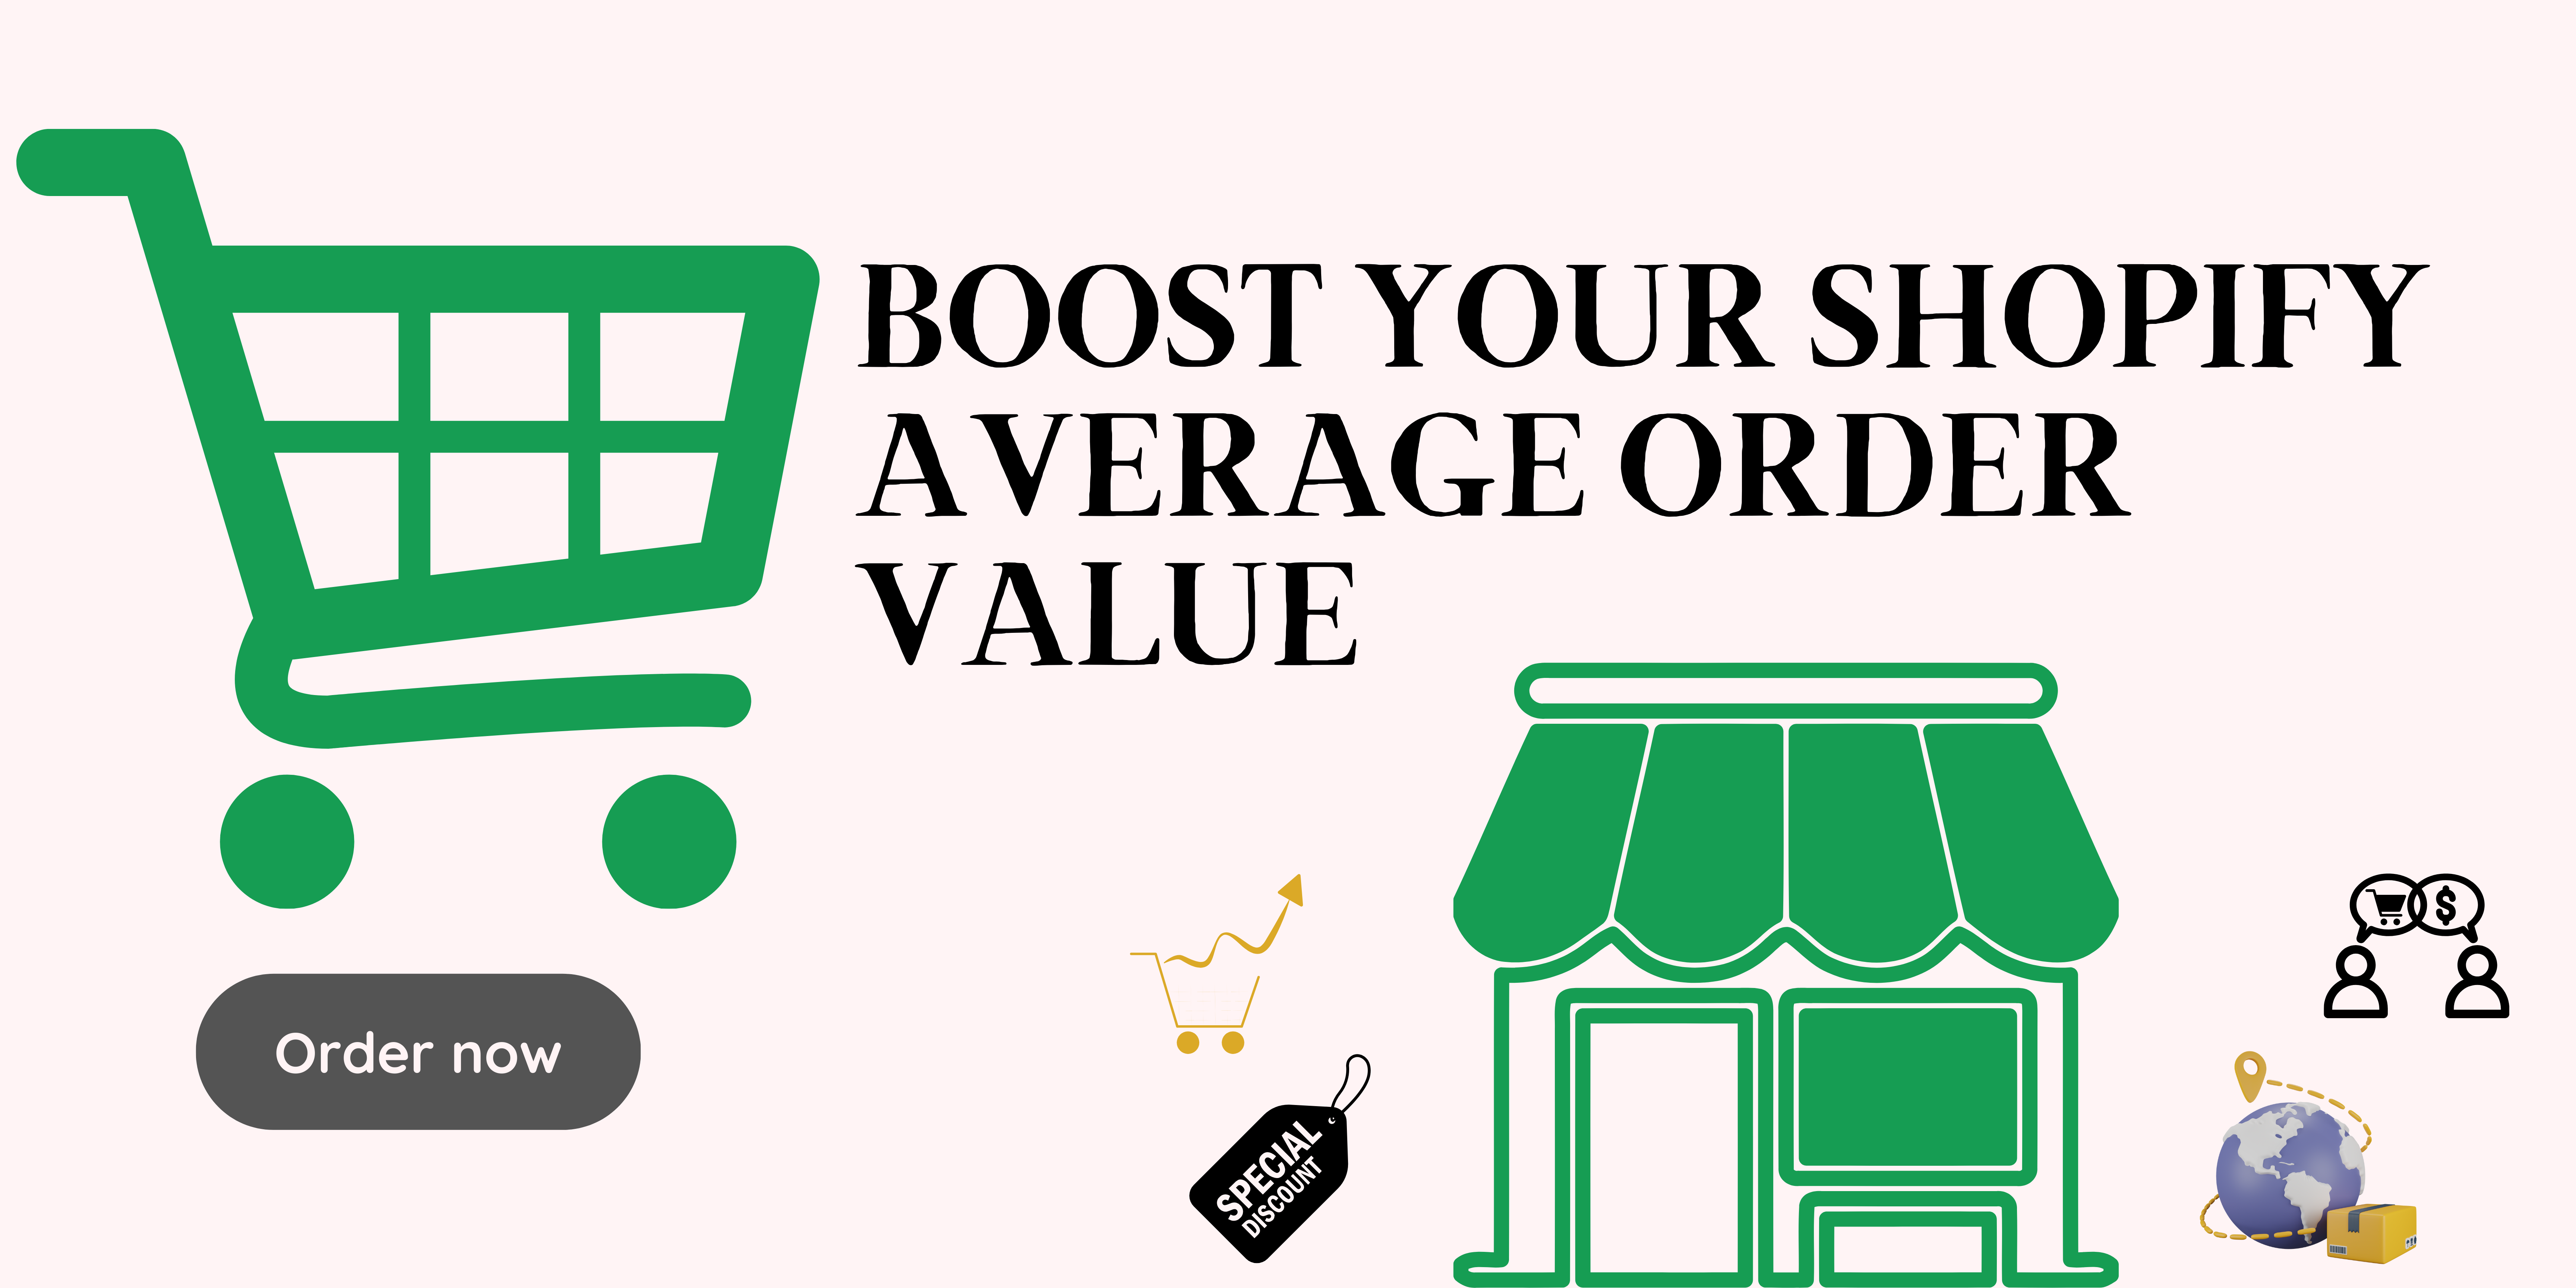 Boost Your Shopify Average Order Value